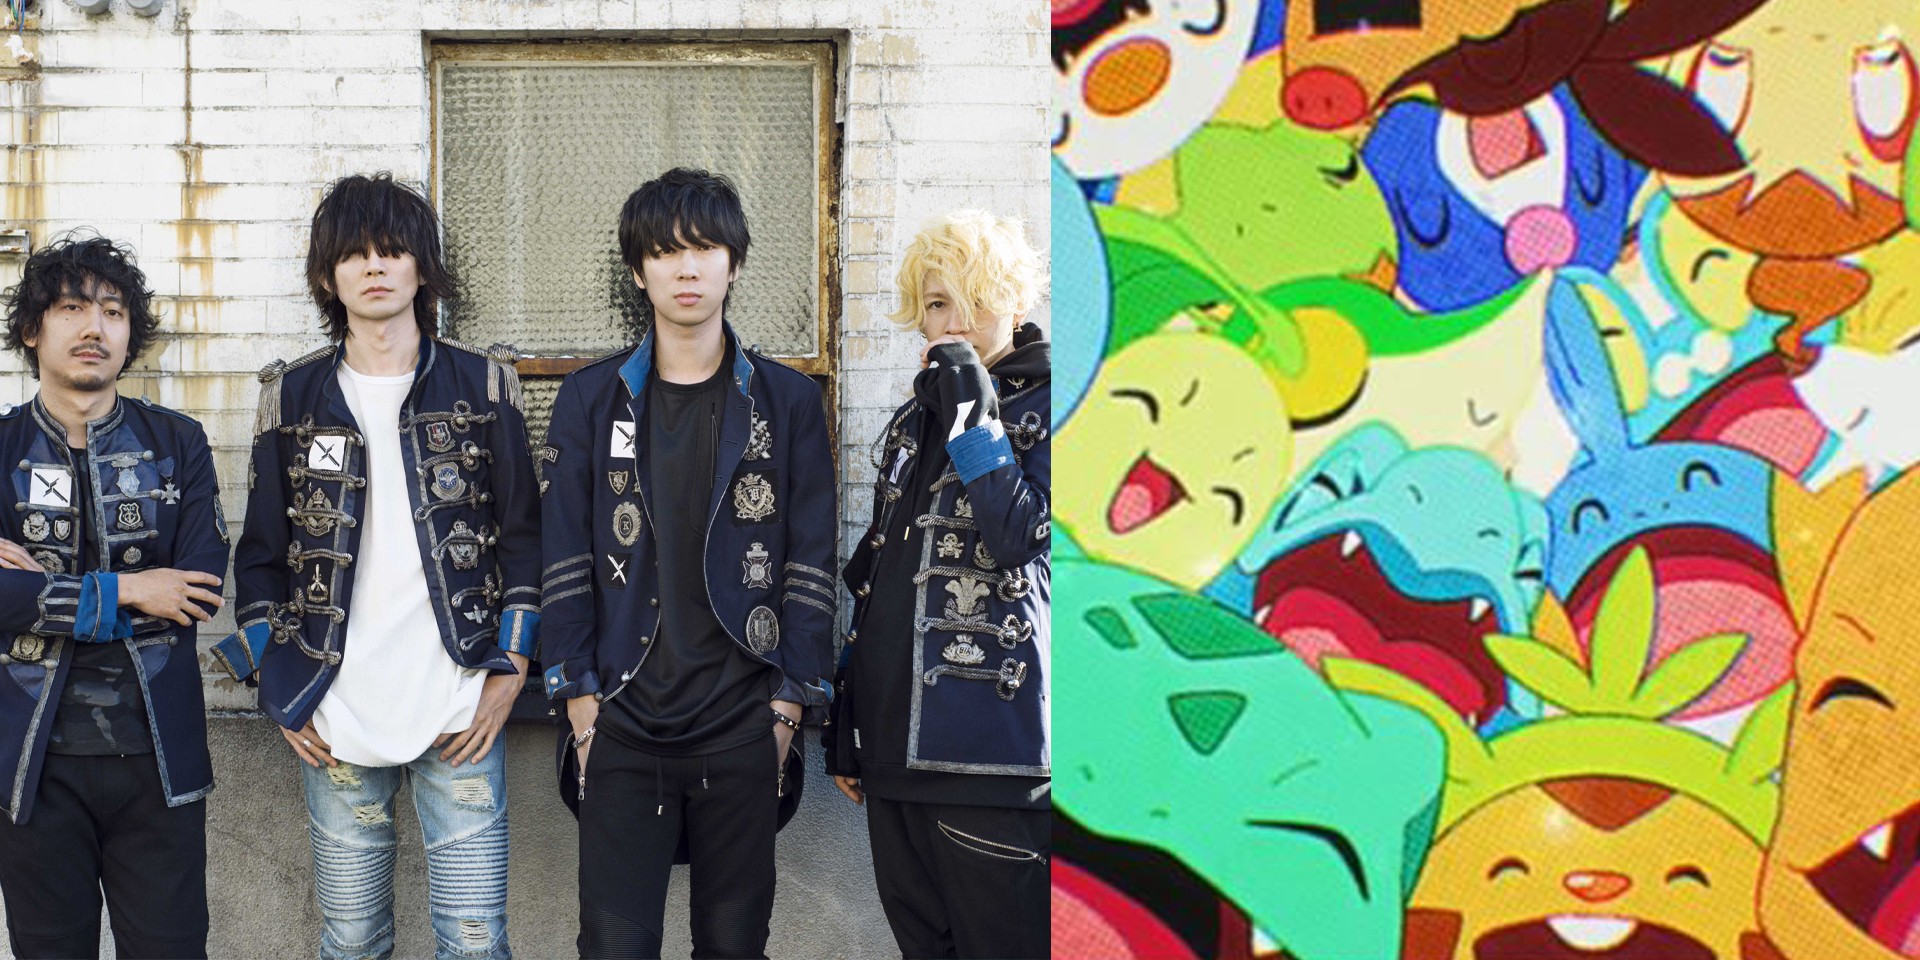 Bump of Chicken pay tribute to the legacy of Pokémon with 'Acacia' music video – watch